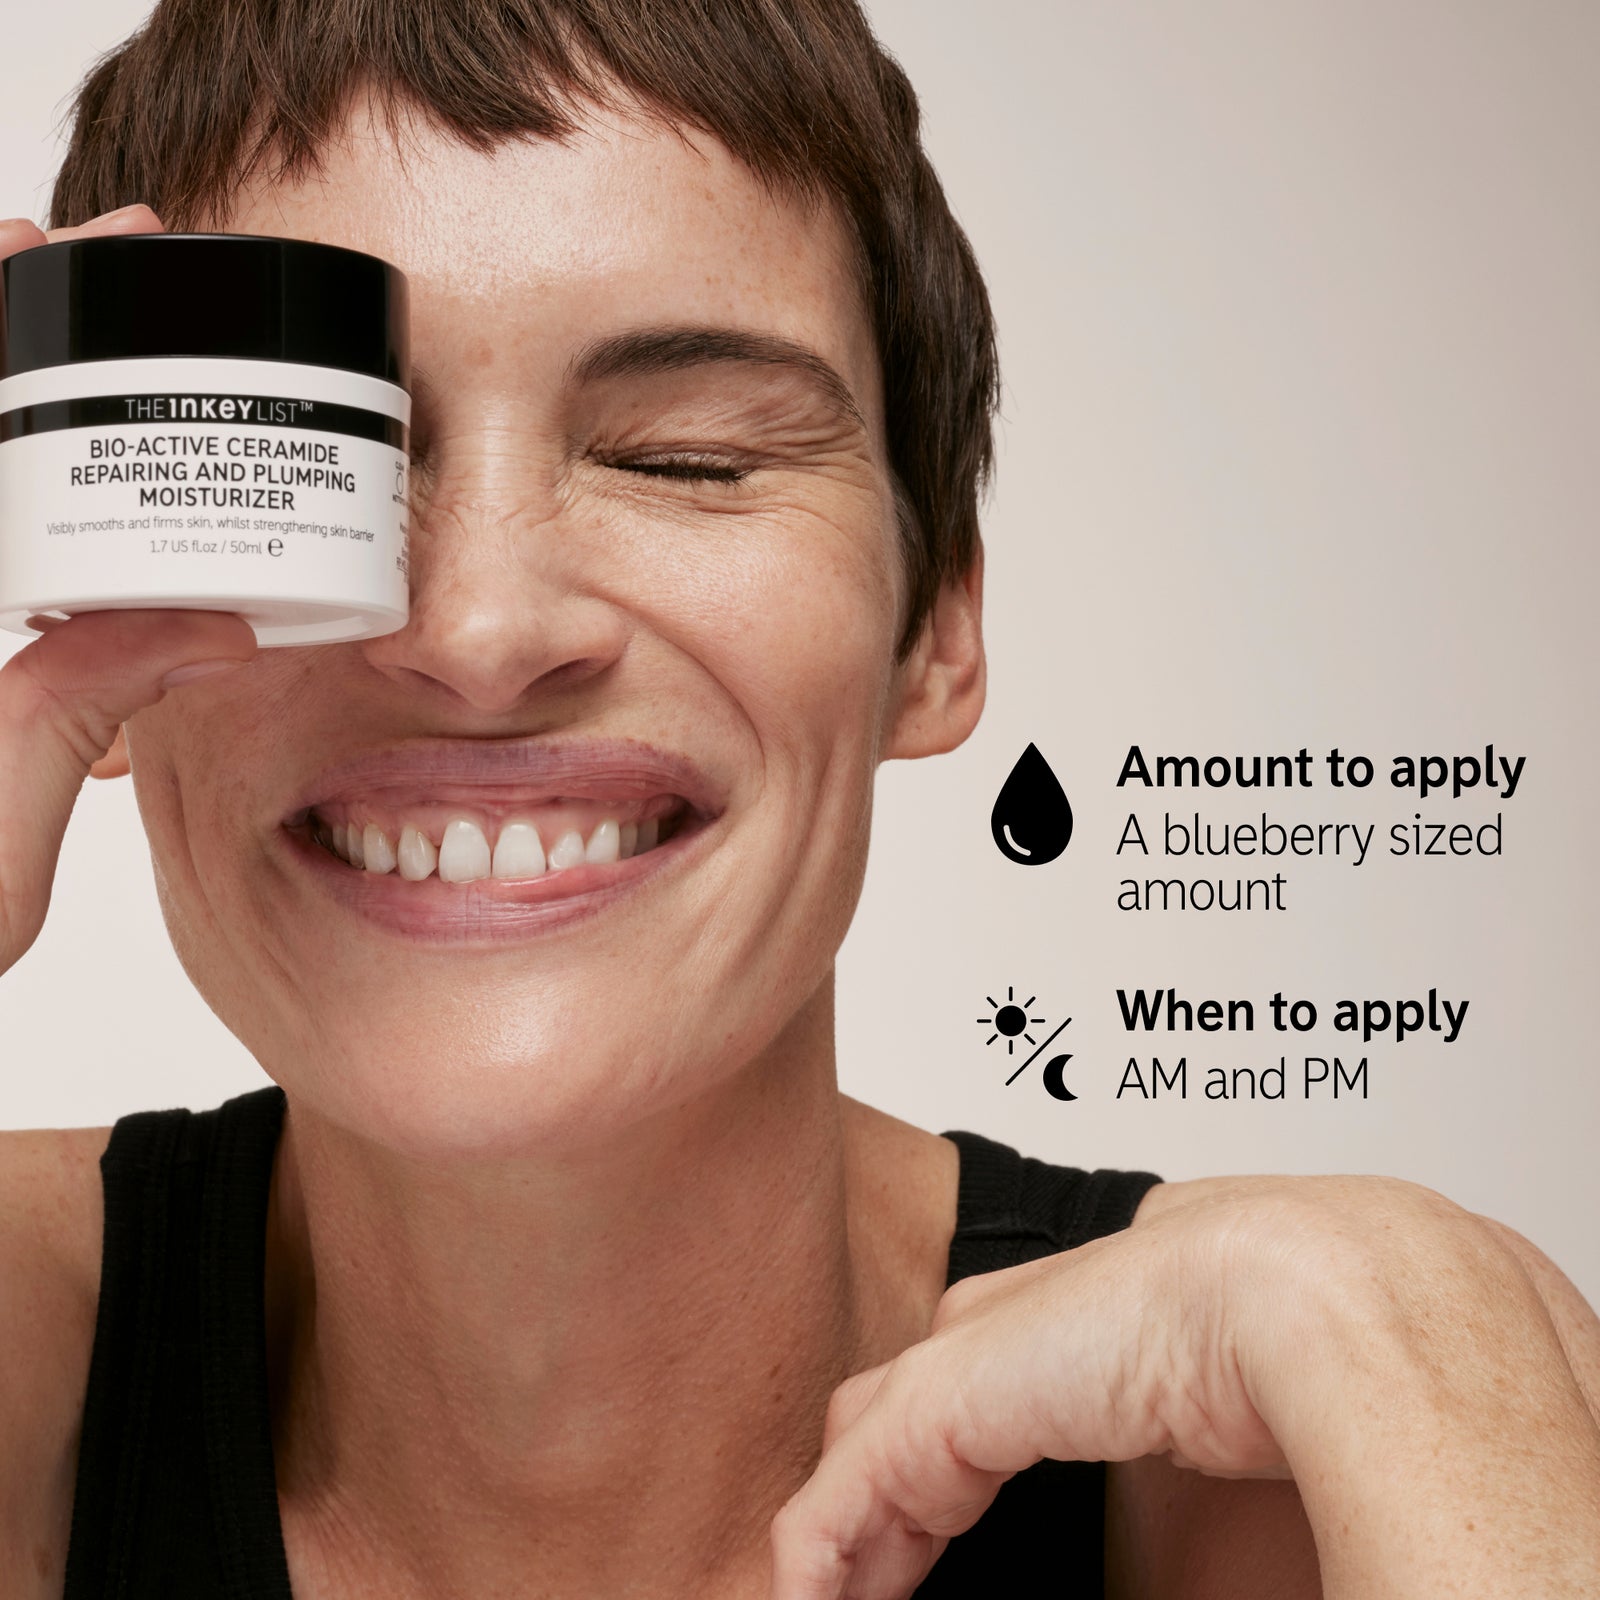 Model holding Bio-Active Ceramide Repairing and Plumping Moisturiser with how to use instructions.